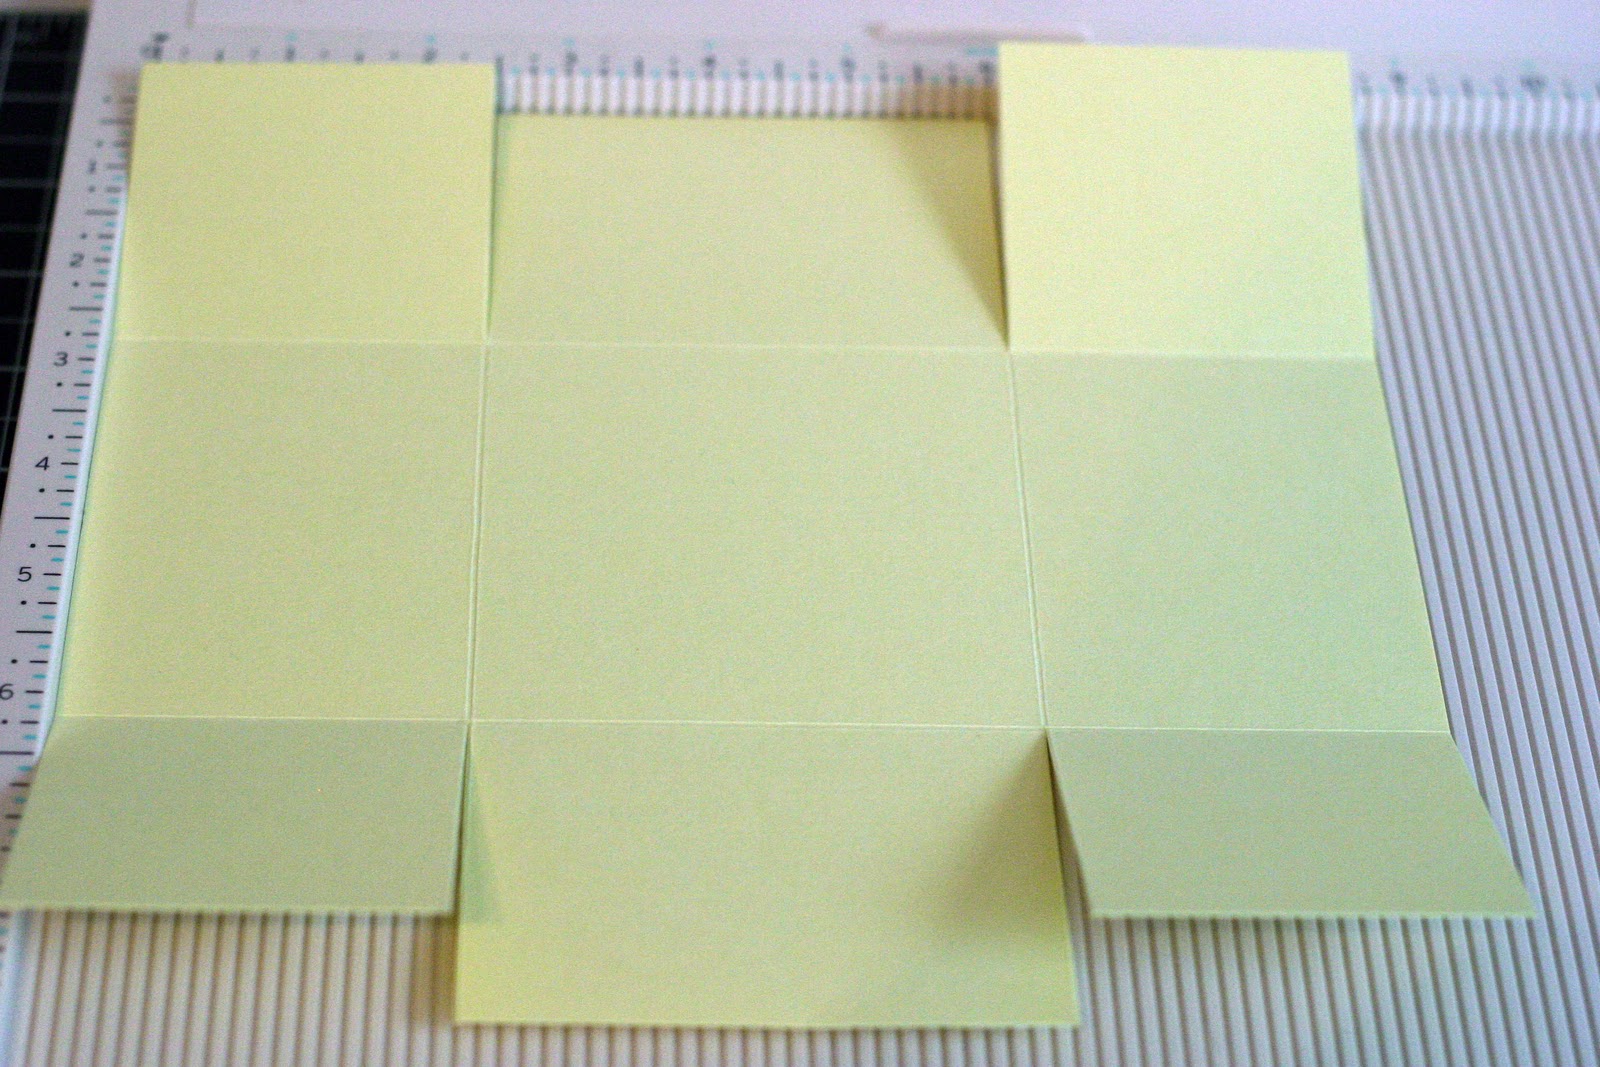 CutCardStock.com - Affordable Cardstock for all your Papercrafting Projects